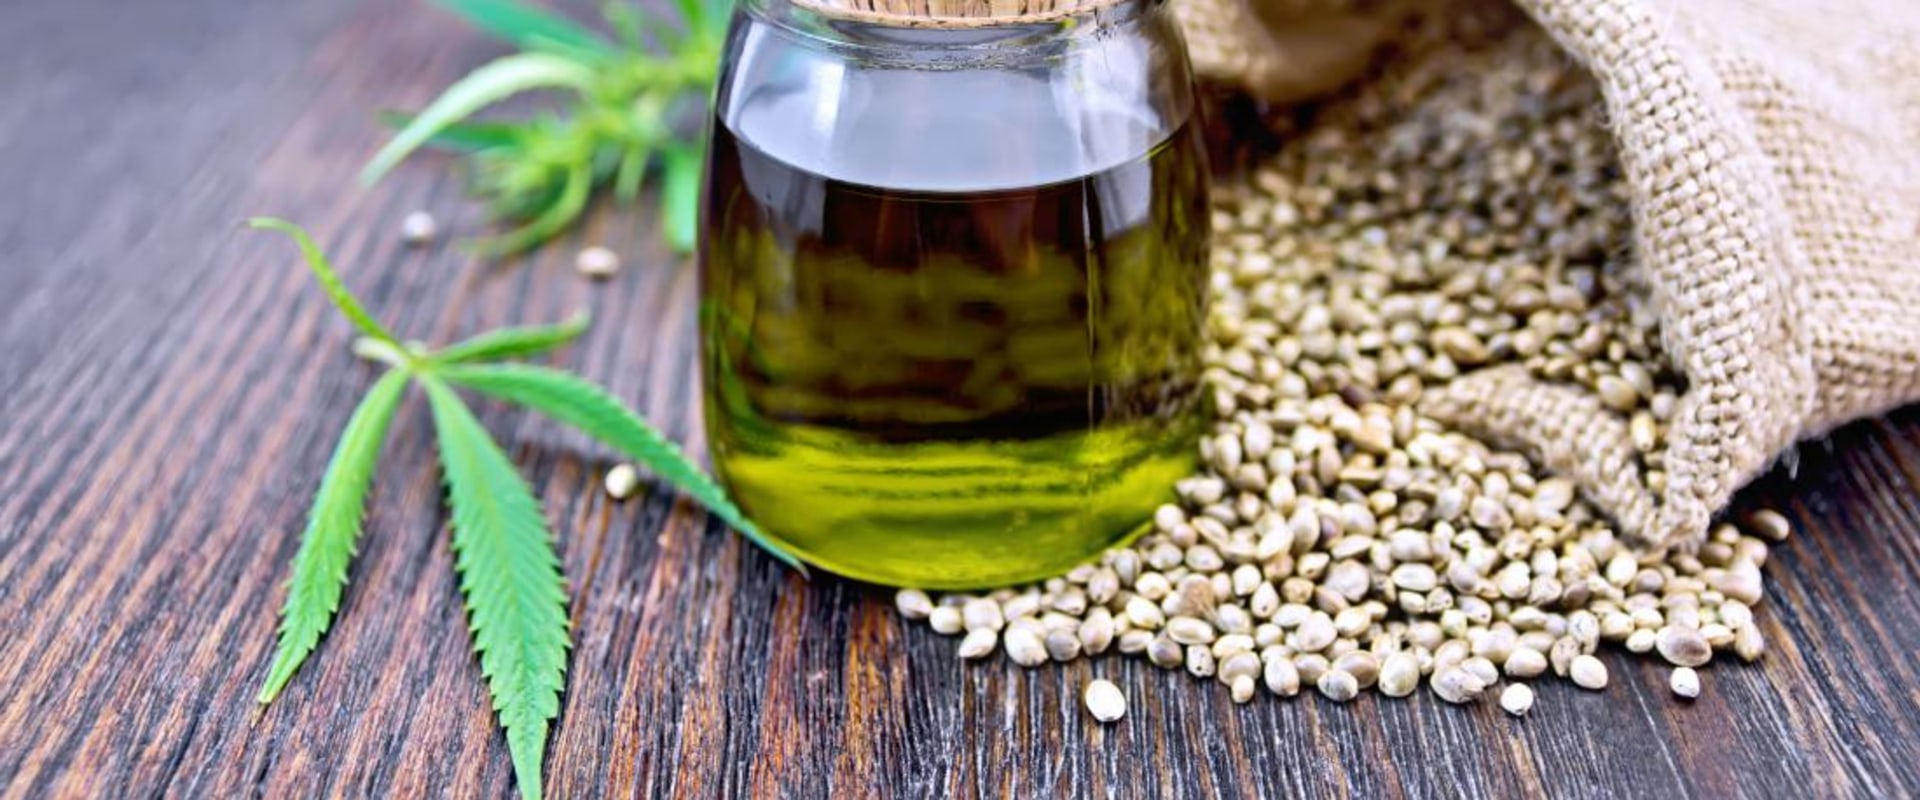 The Benefits of Hemp Extract for Pain Relief